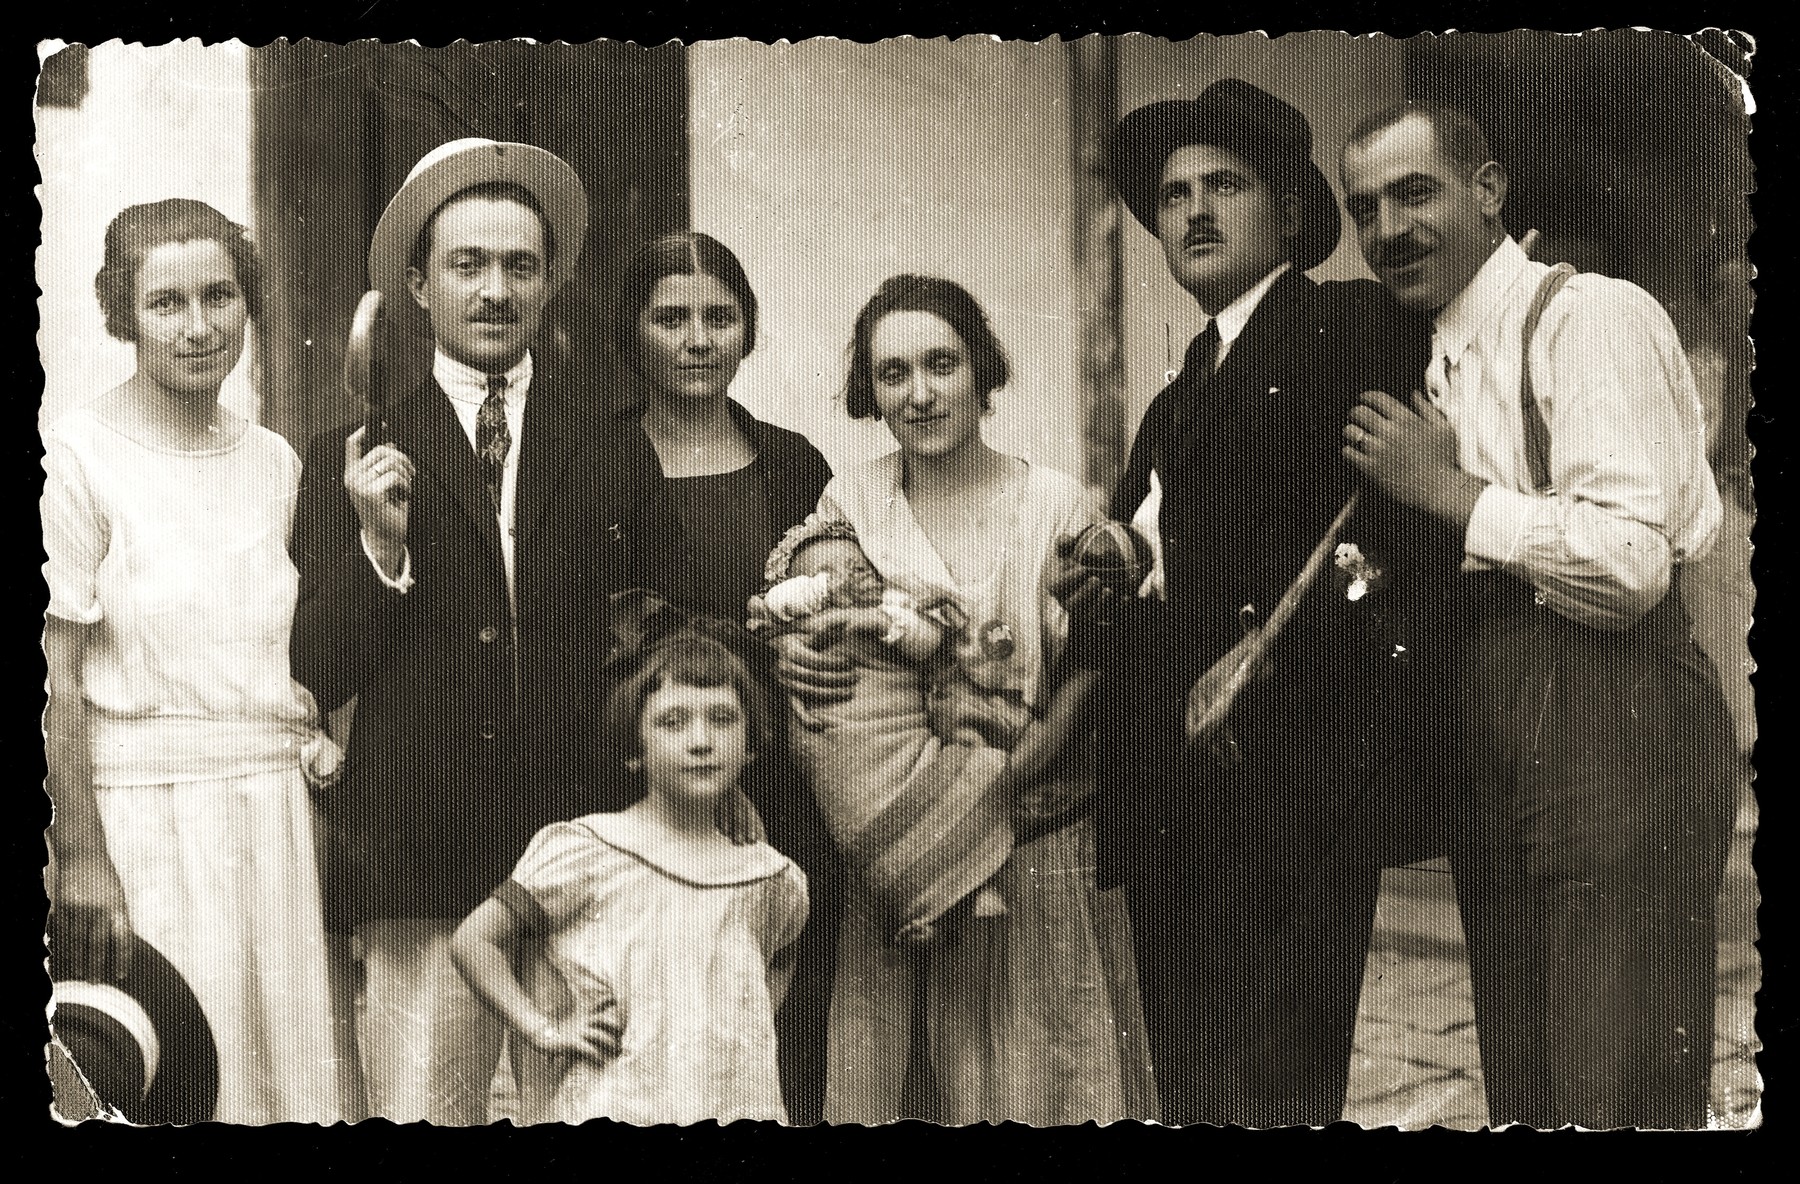 Group portrait of the Konfino family in Belgrade.  

Among those pictured are Gavra (far right), Gabriela (Ela, the child in front), and Gizela (the infant).